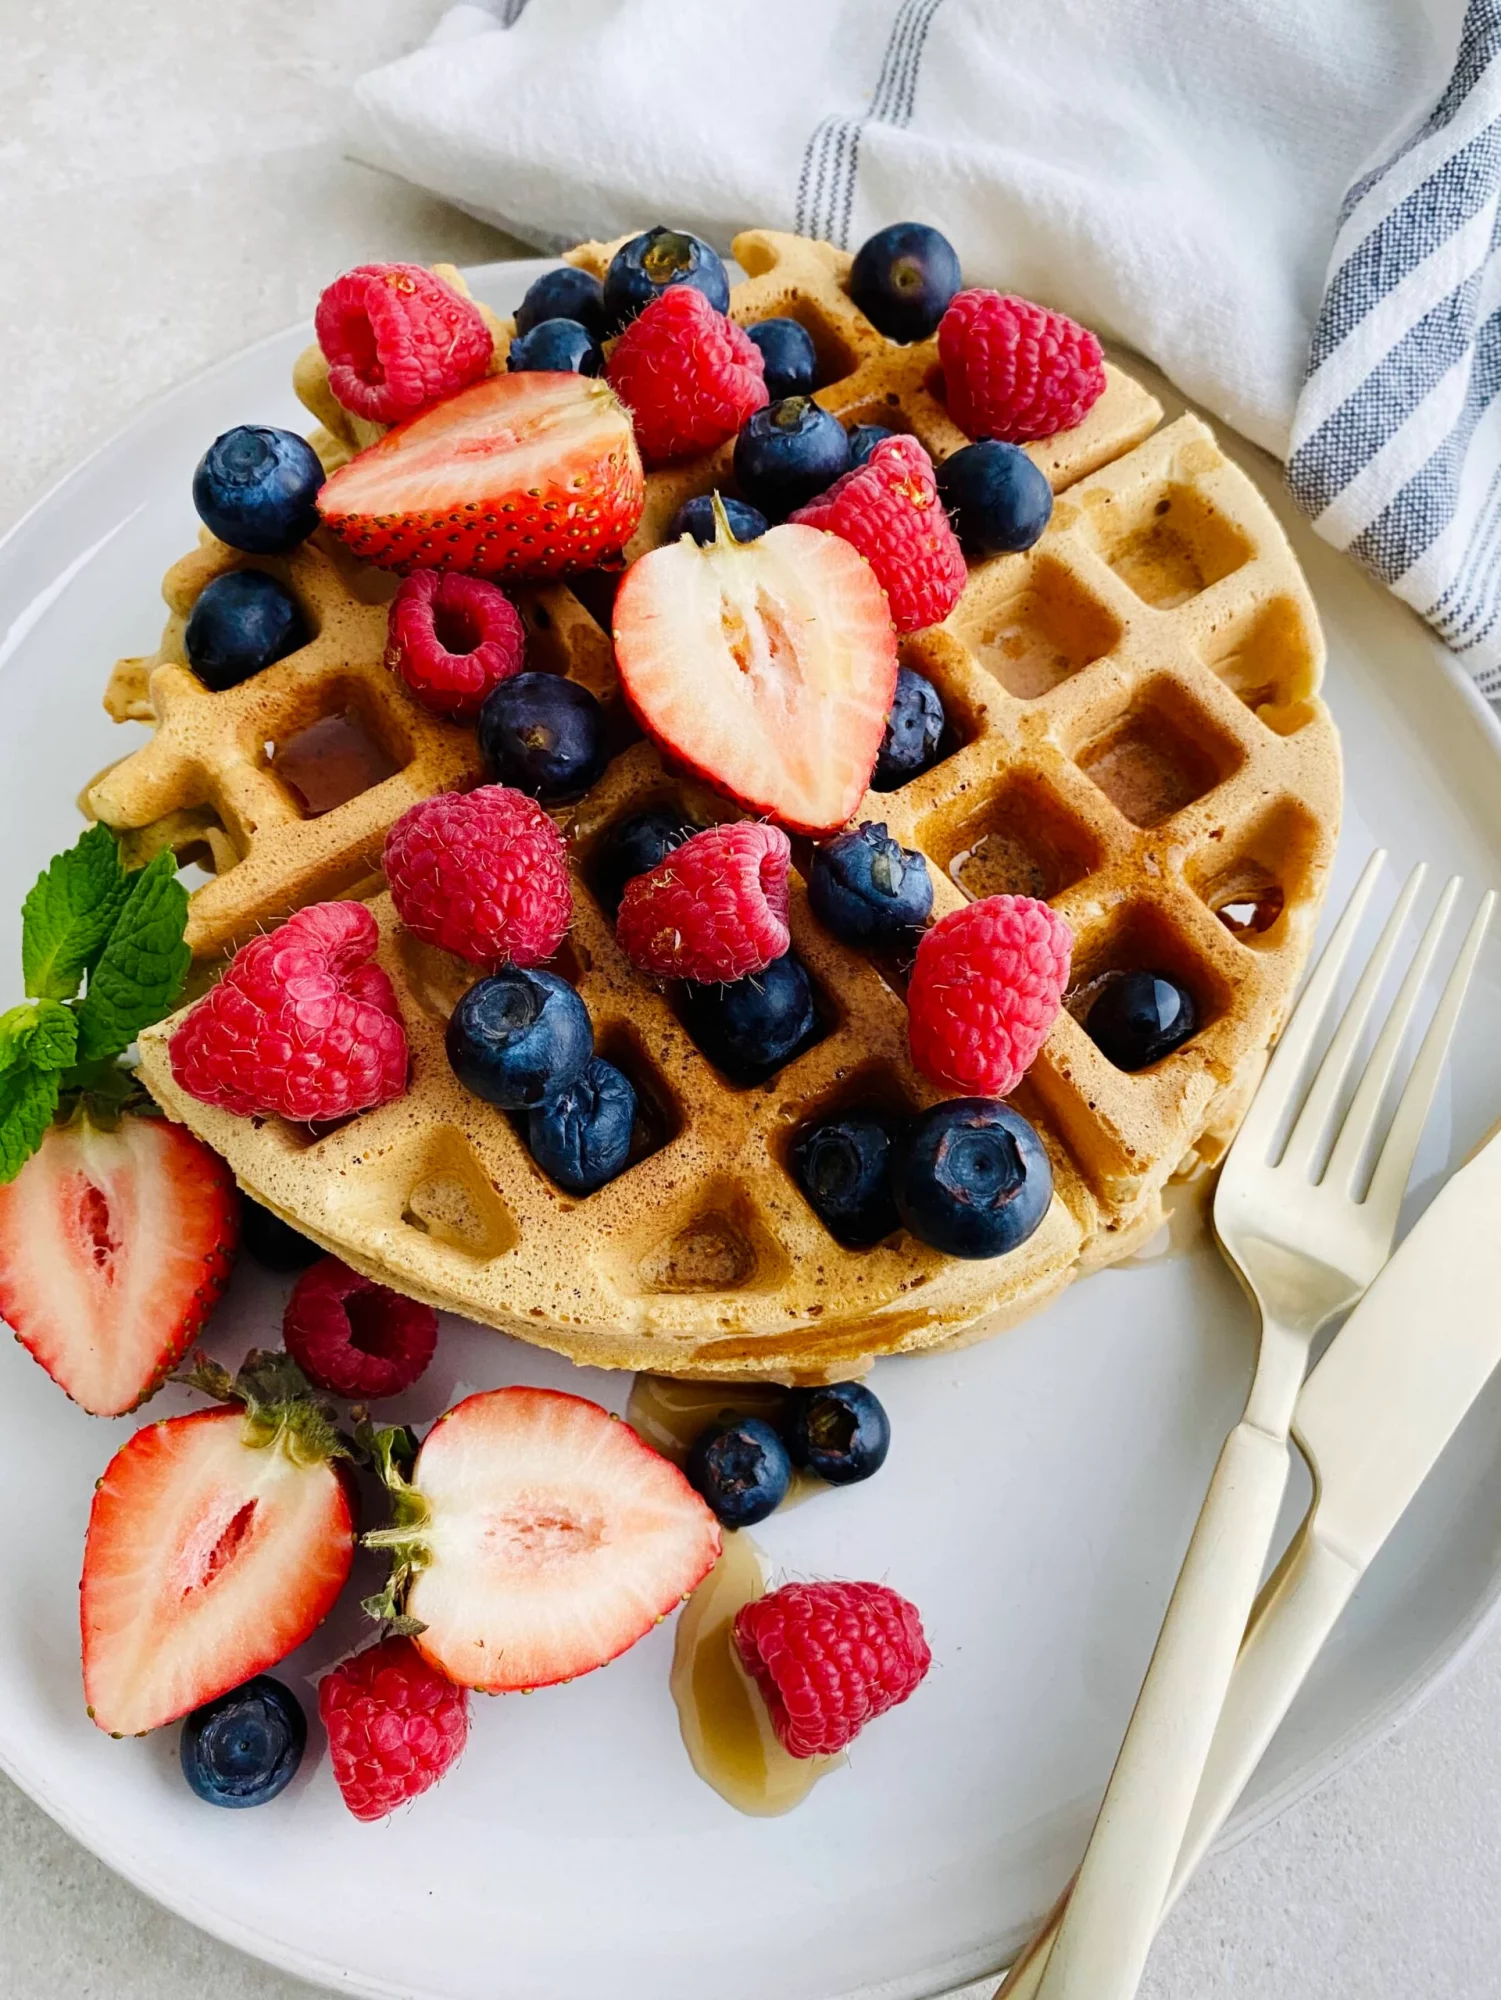 Waffles are topped with pieces of assorted fruit